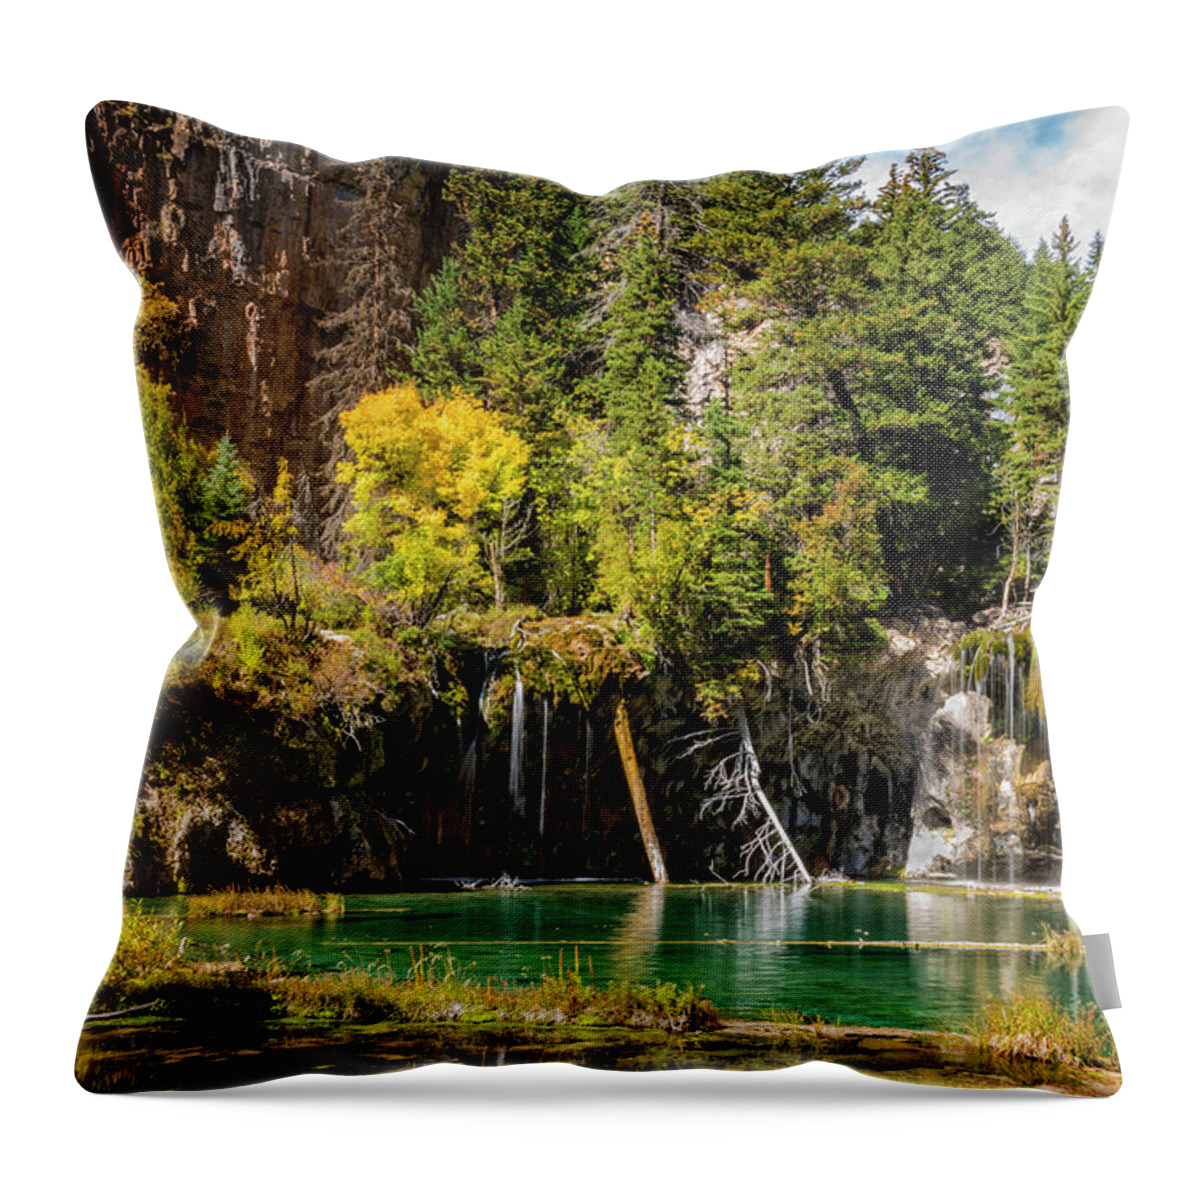 Autumn At Hanging Lake Waterfall Glenwood Canyon Colorado Throw Pillow featuring the photograph Autumn At Hanging Lake Waterfall - Glenwood Canyon Colorado #2 by Brian Harig